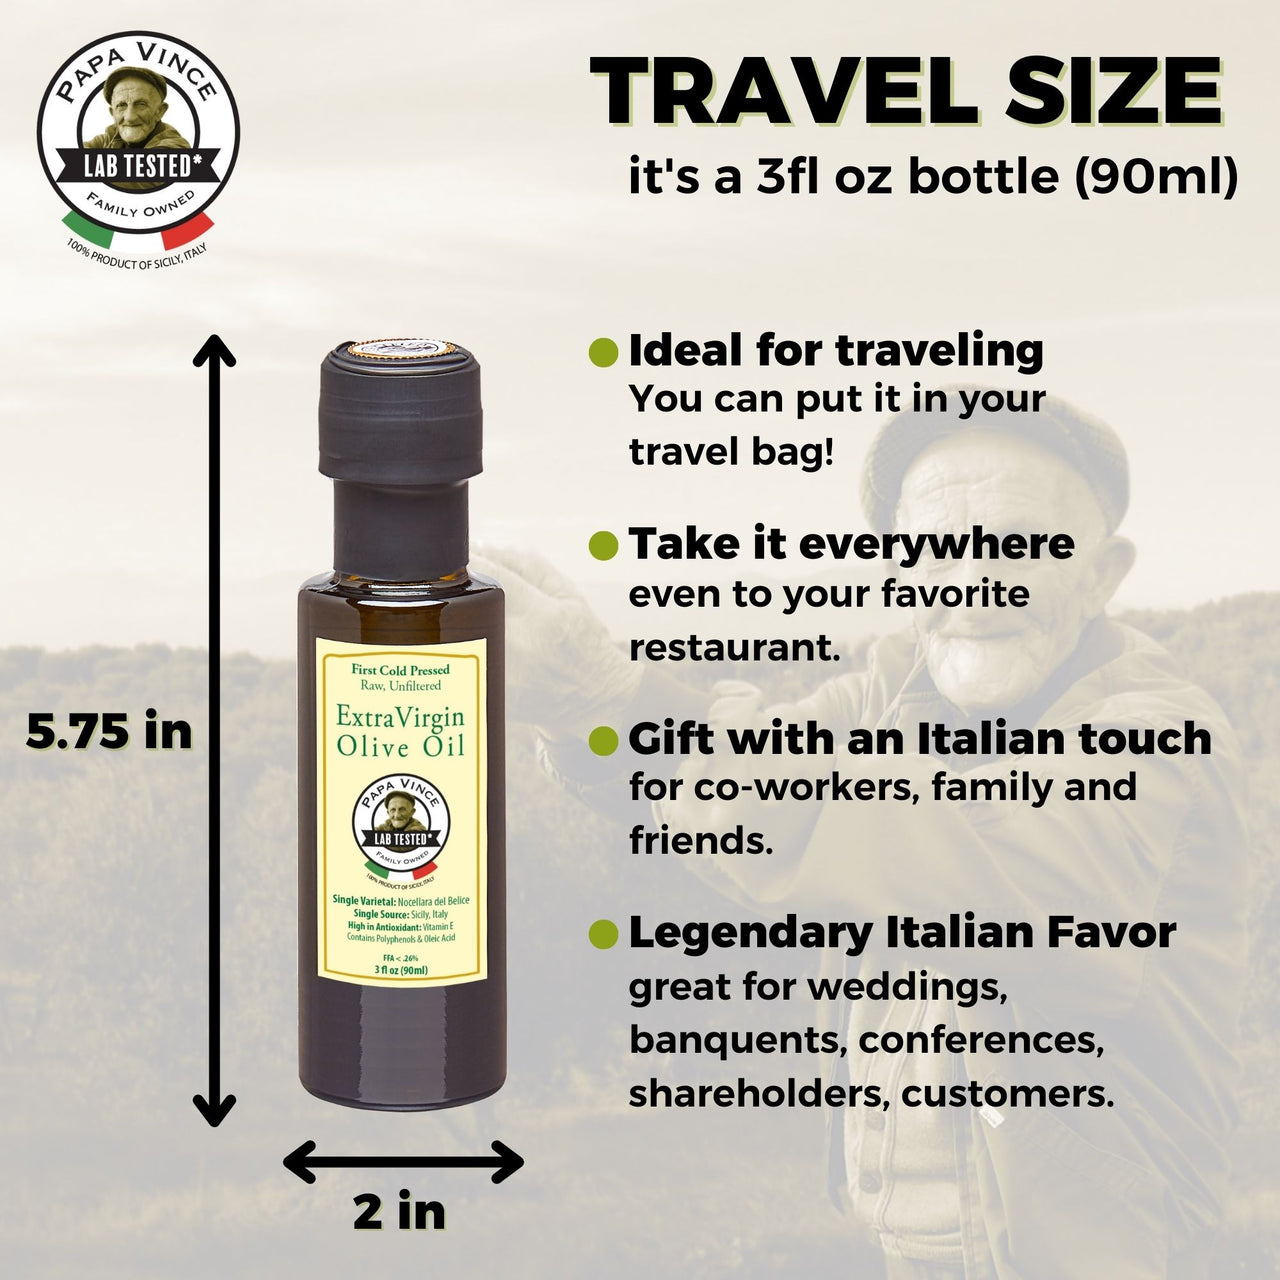 Olive Oil Set from Sicily - Olive Oil Extra Virgin Gift Unblended First Cold Pressed, Single Sourced from Italy, Unfiltered, Unrefined, Robust, Rich in Antioxidants 3 fl oz [4Pack] | Papa Vince - Papa Vince